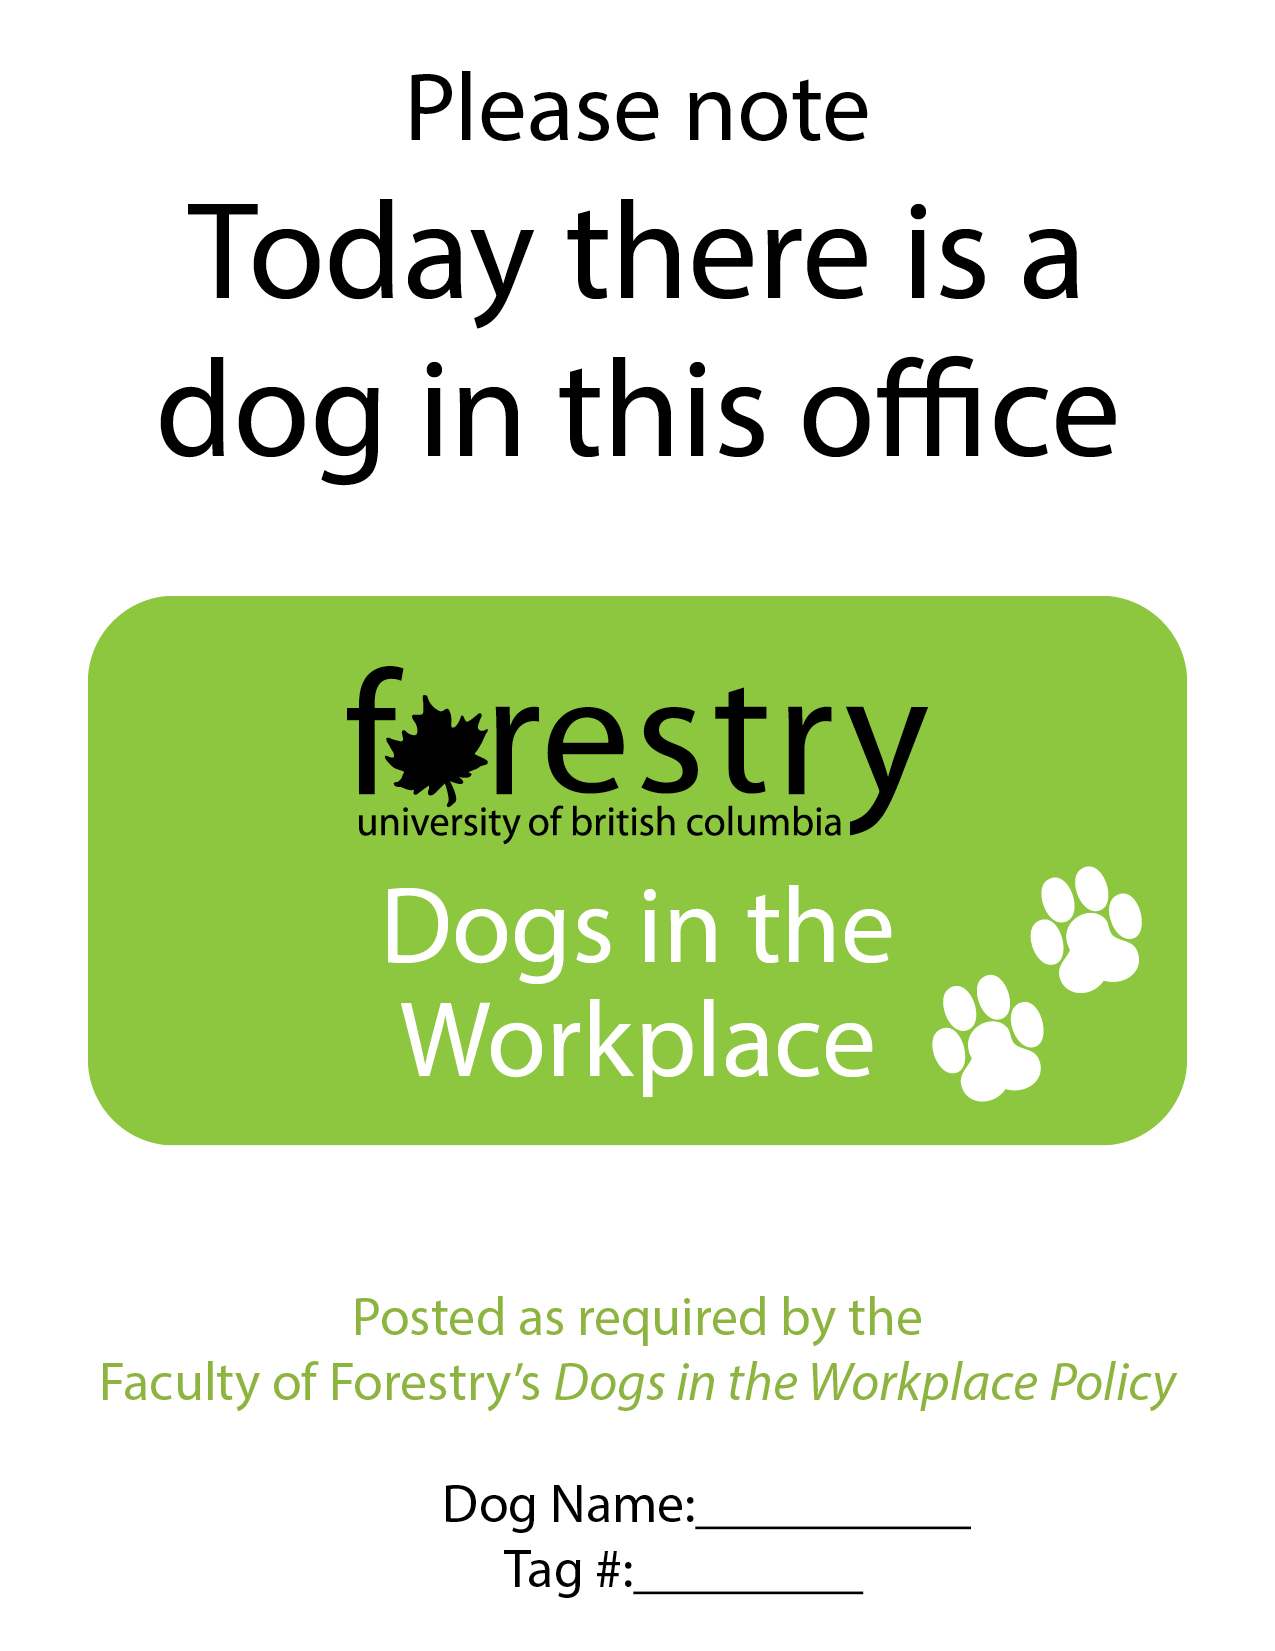 Official UBC Forestry dog in office sign